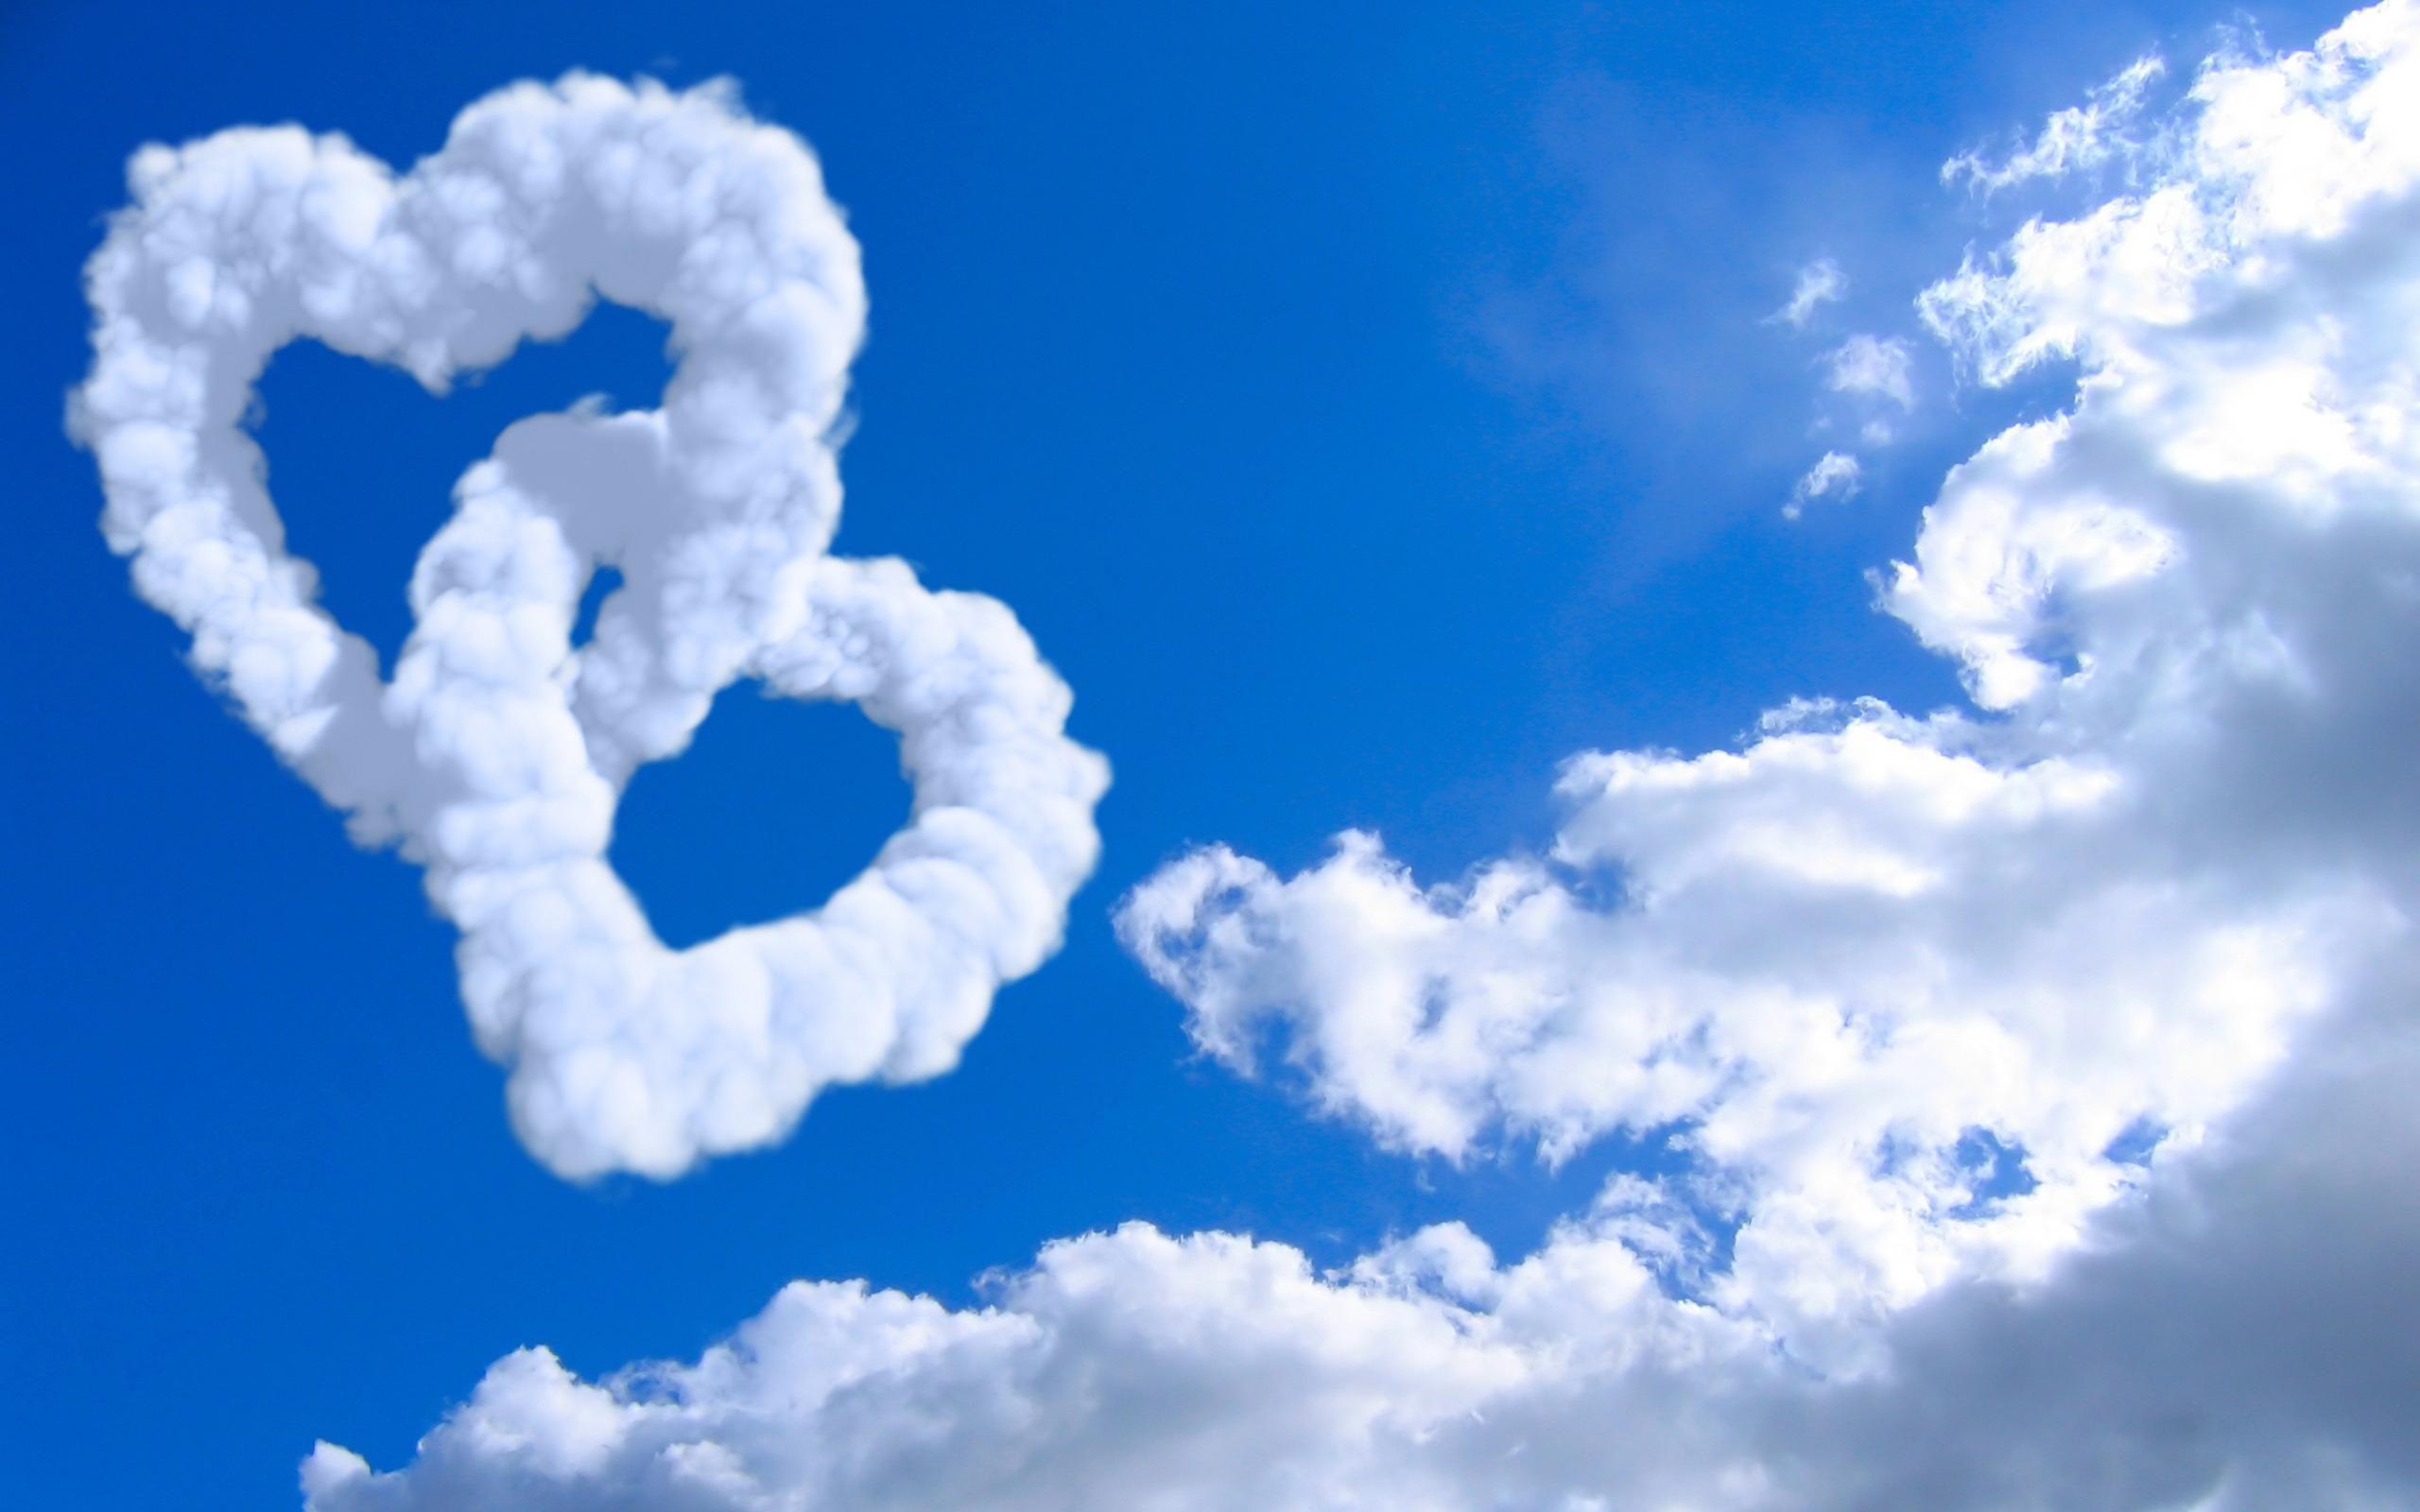 Sky Clouds Background with Love Hearts. Photo Texture & Background